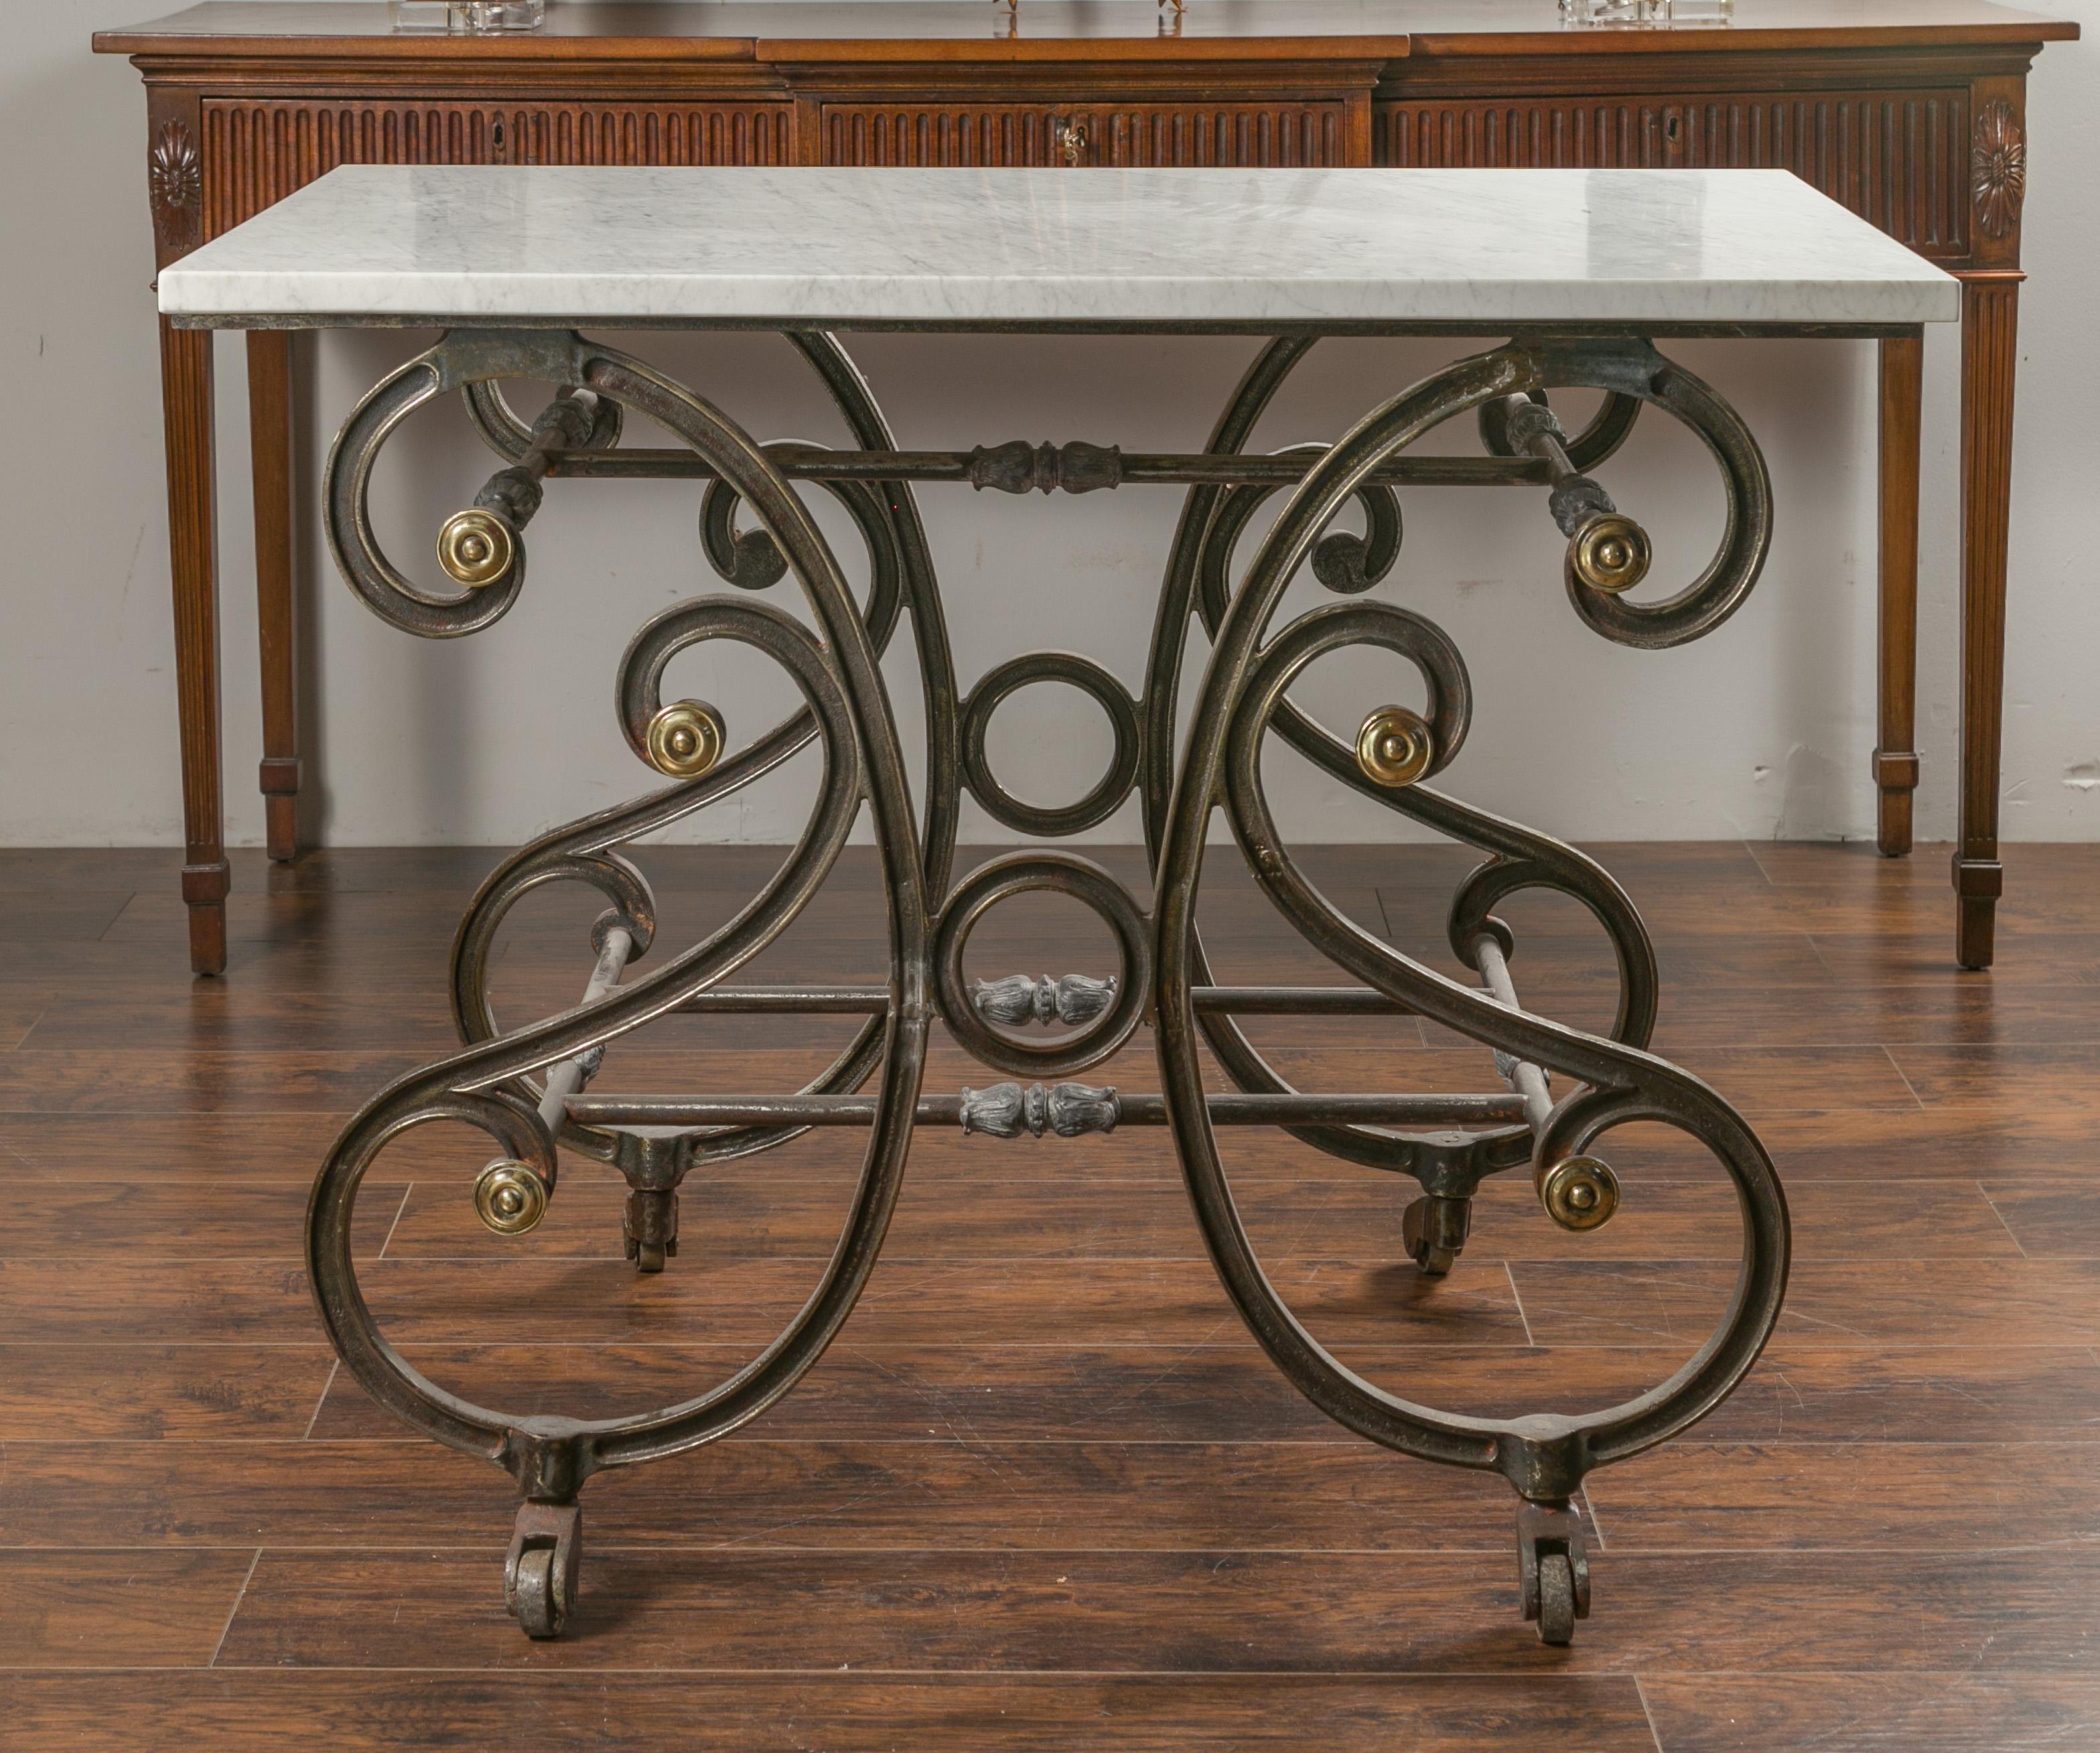 A French steel baker's table from the 19th century, with white marble top, brass accents and casters. Created in France during the 19th century, this baker's table features a white veined marble top sitting above a scrolling steel base accented with